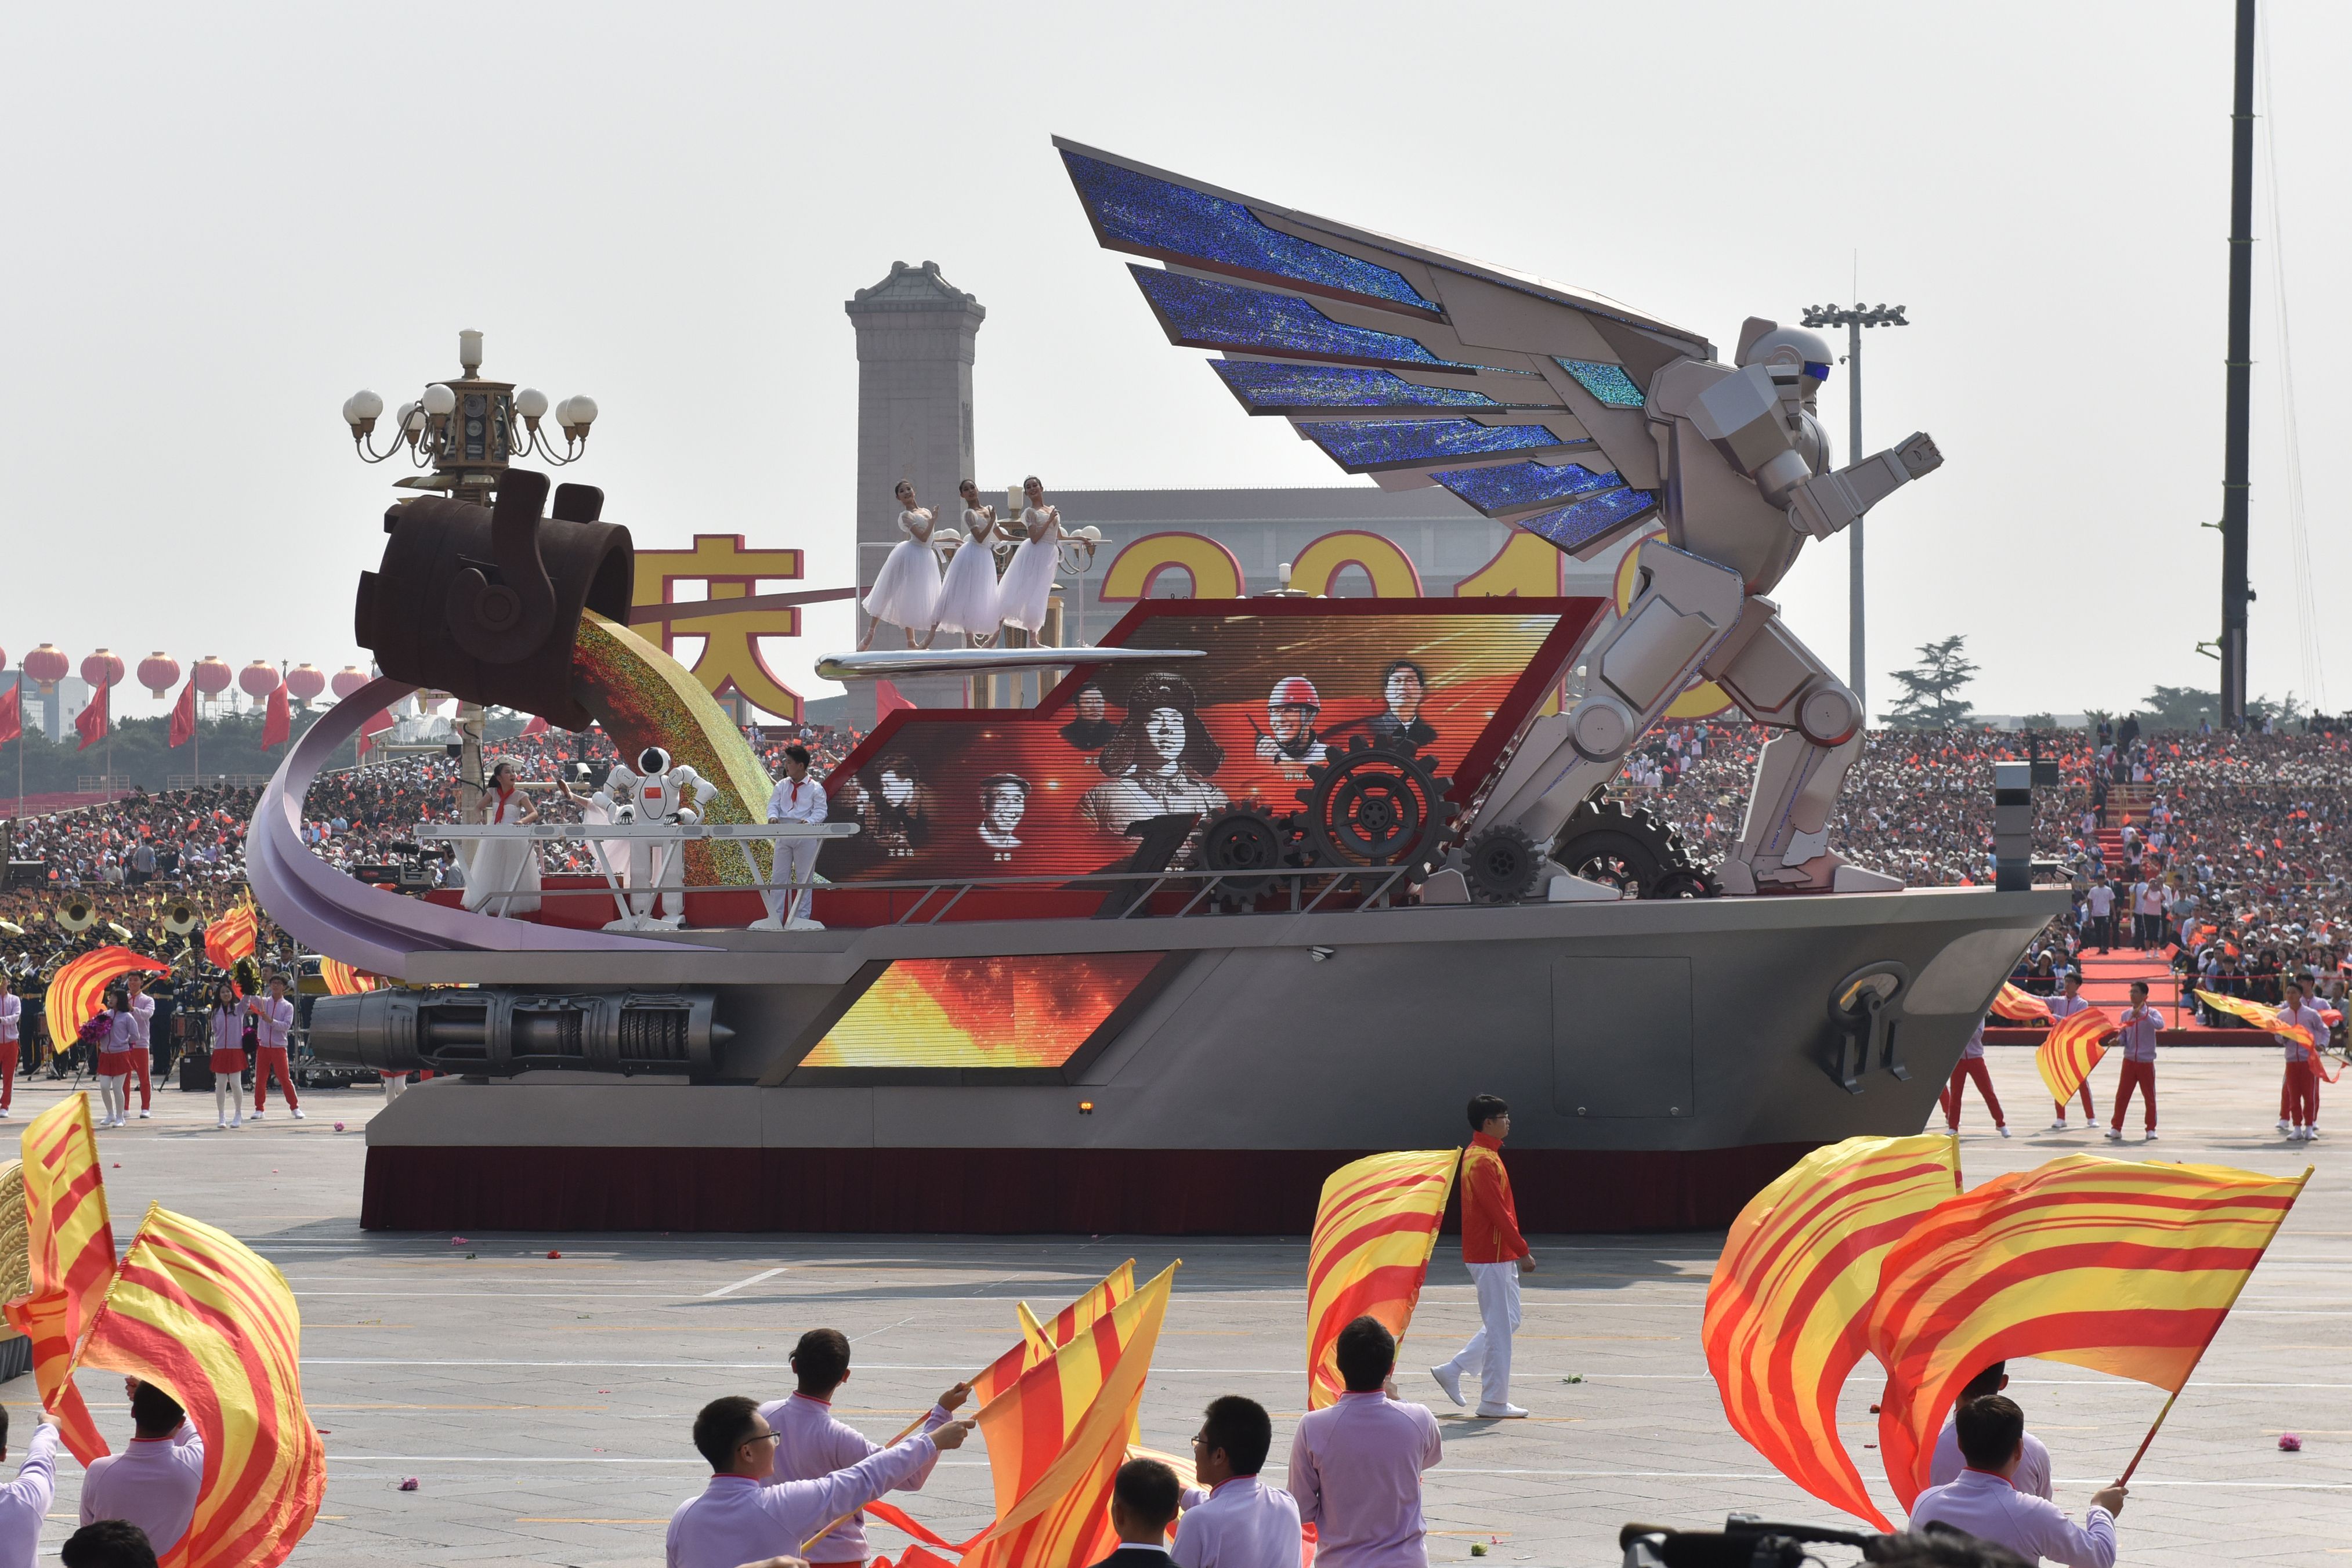 The Liaoning Province float featuring a giant winged robot passes through Tiananmen Square during a military parade in Beijing on October 1